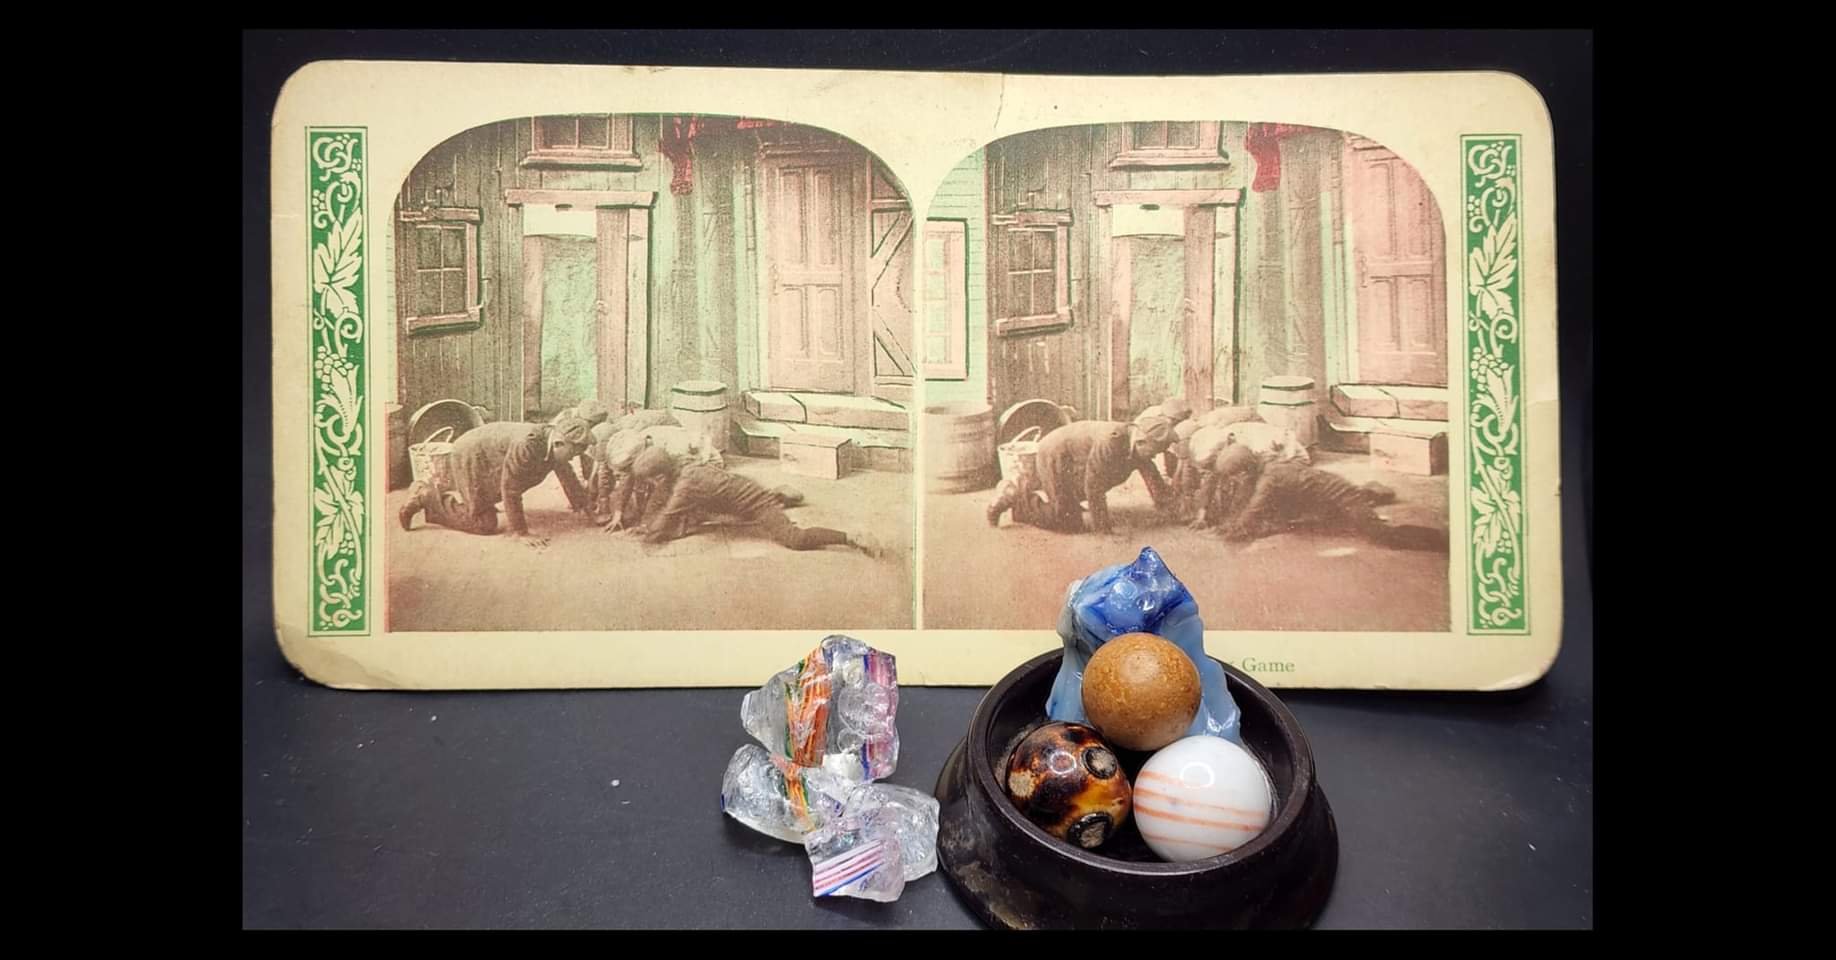 $35 Antique 1800's Stereoscopic picture of marble players with an assortment of historical marbles